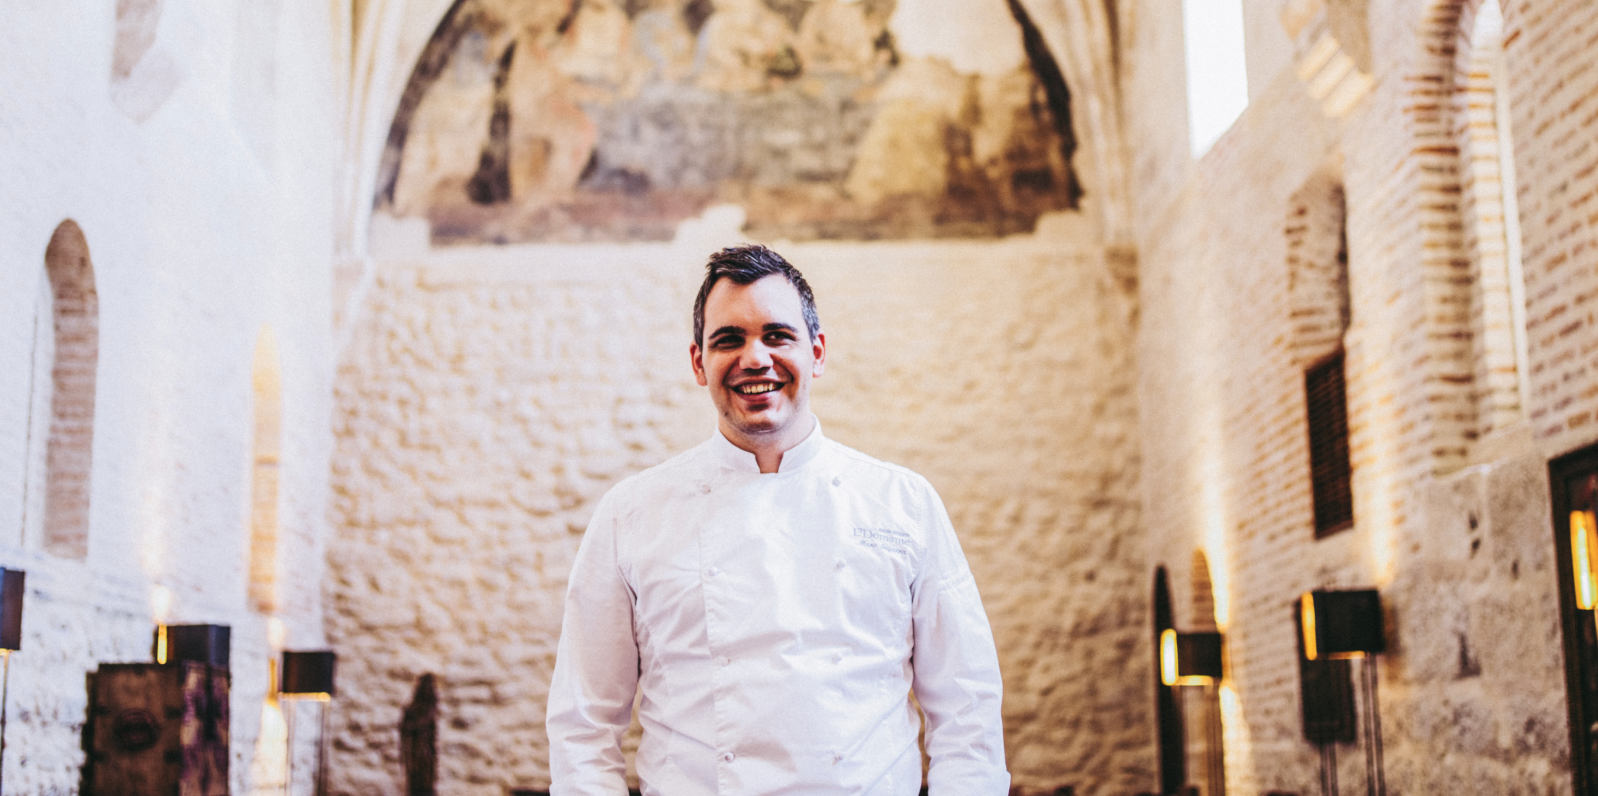 Marc Segarra pays tribute to the local community with his new Refectorio menu